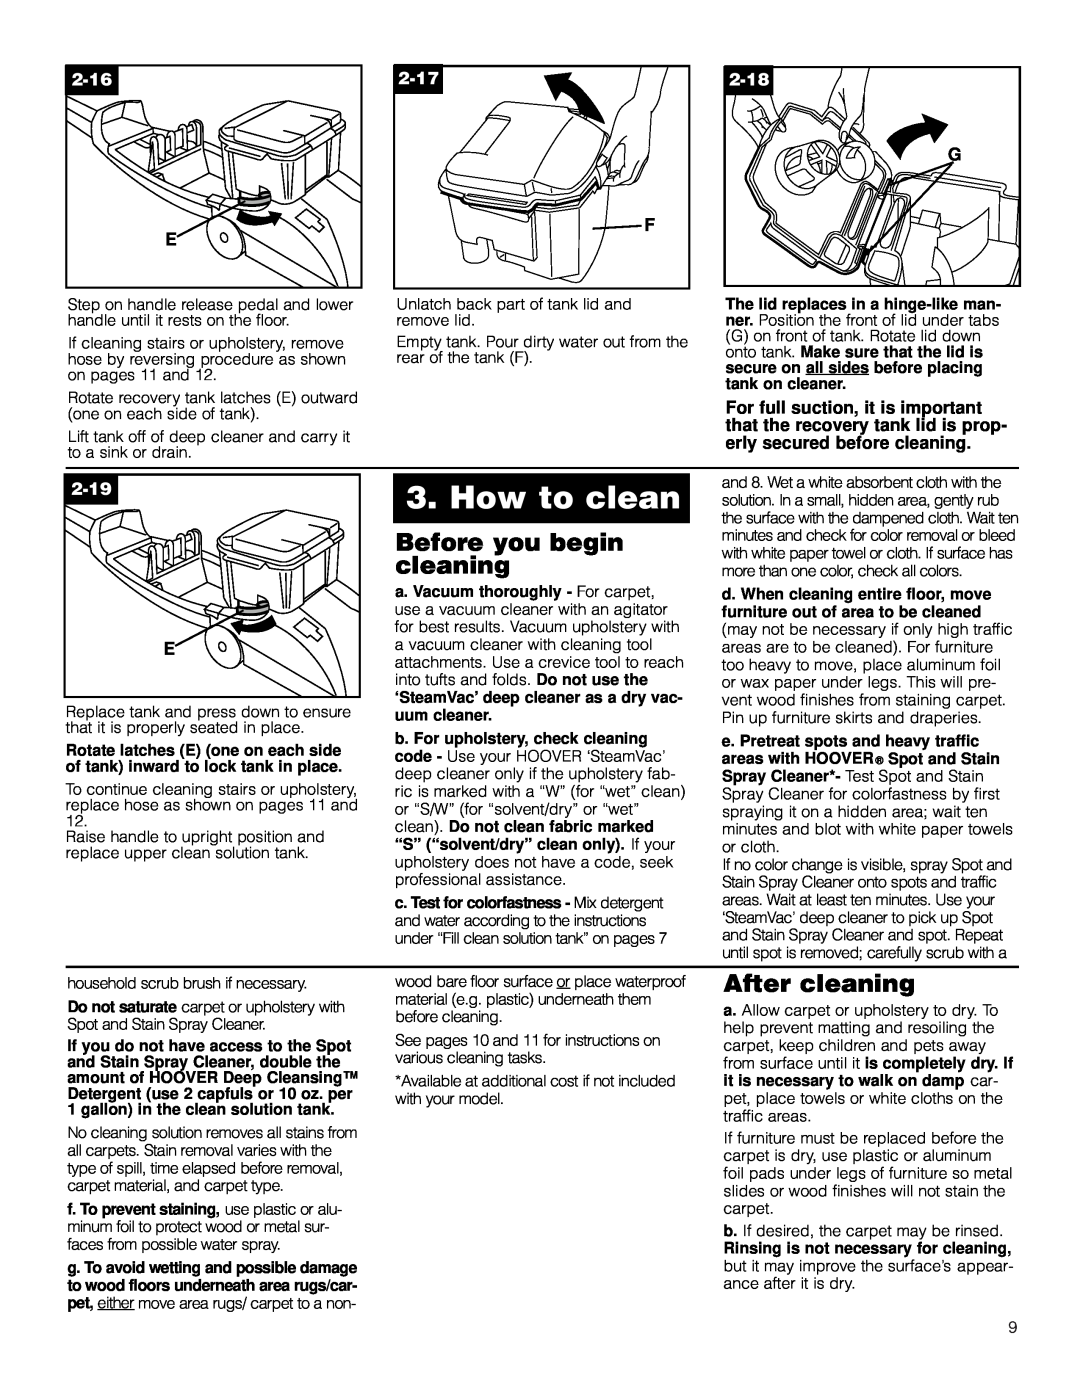 Hoover F5906900 owner manual How to clean, Before you begin, After cleaning, 2-16, 2-17, 2-18, 2-19 